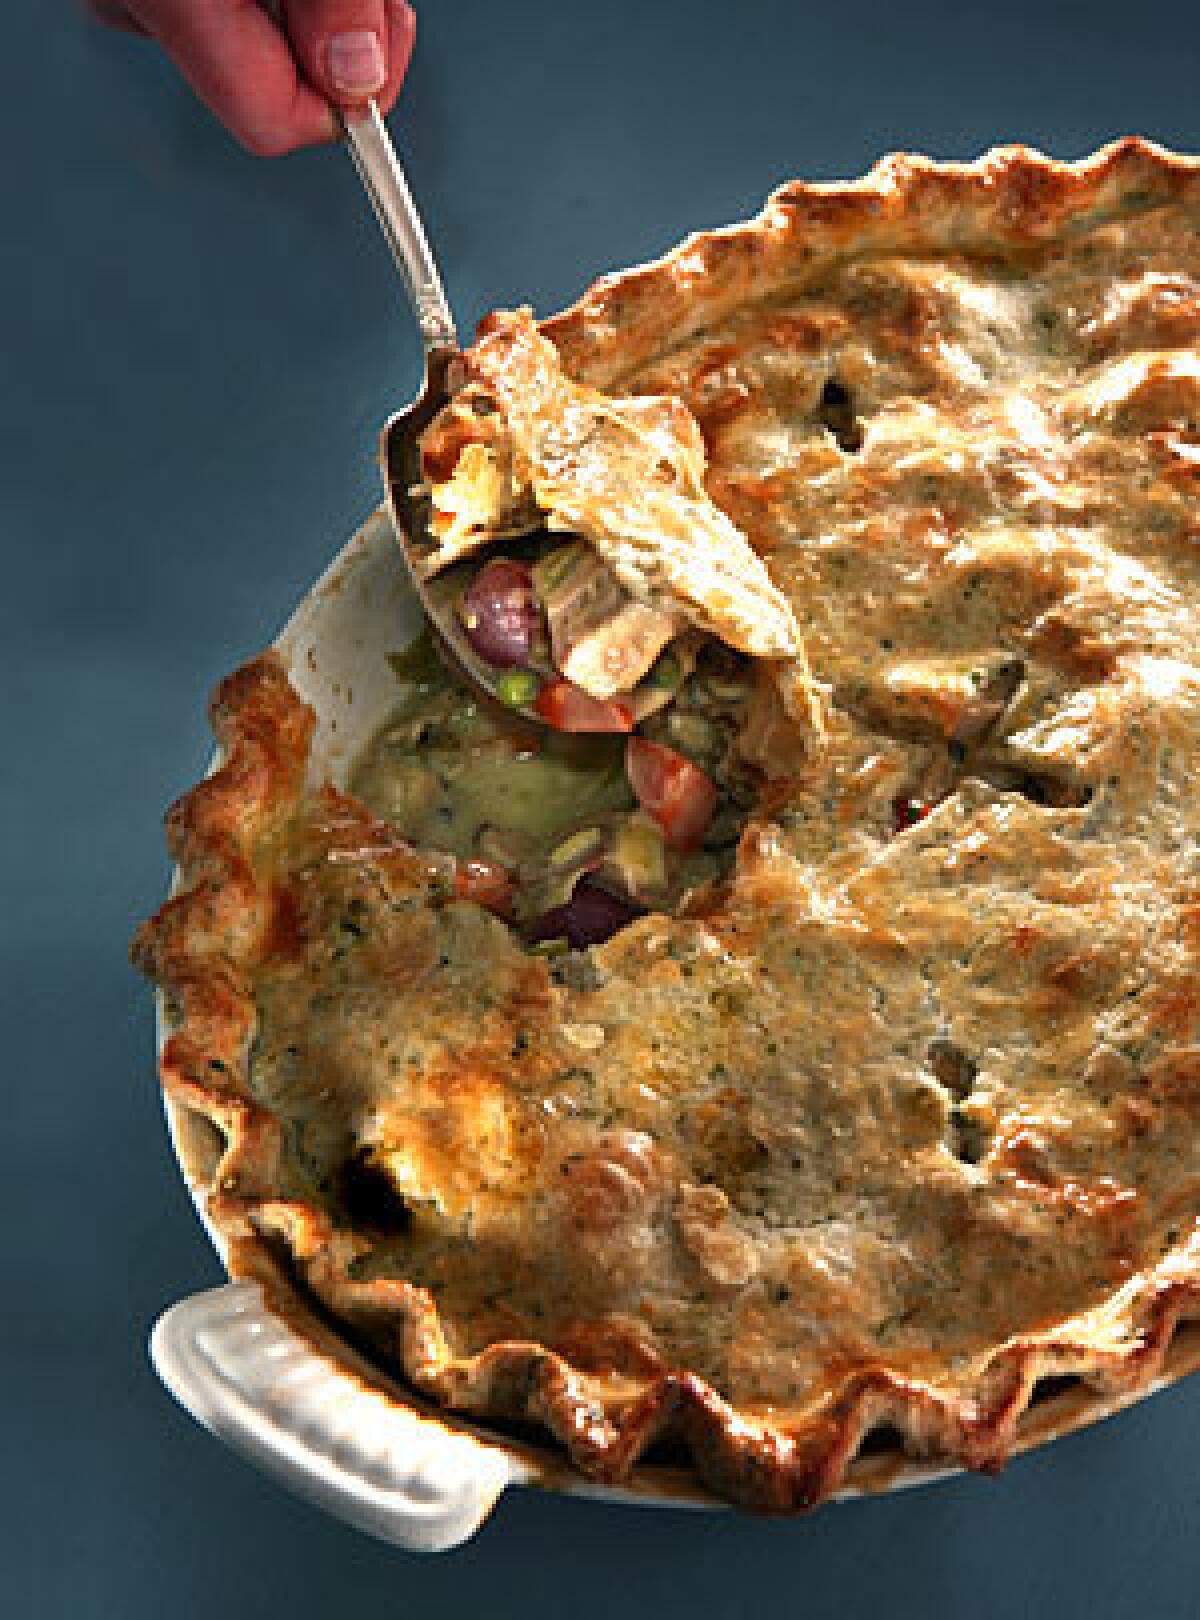 Pot pie is filled with turkey, pearl onions, mushrooms, potatoes and peas. Check out the recipe here.